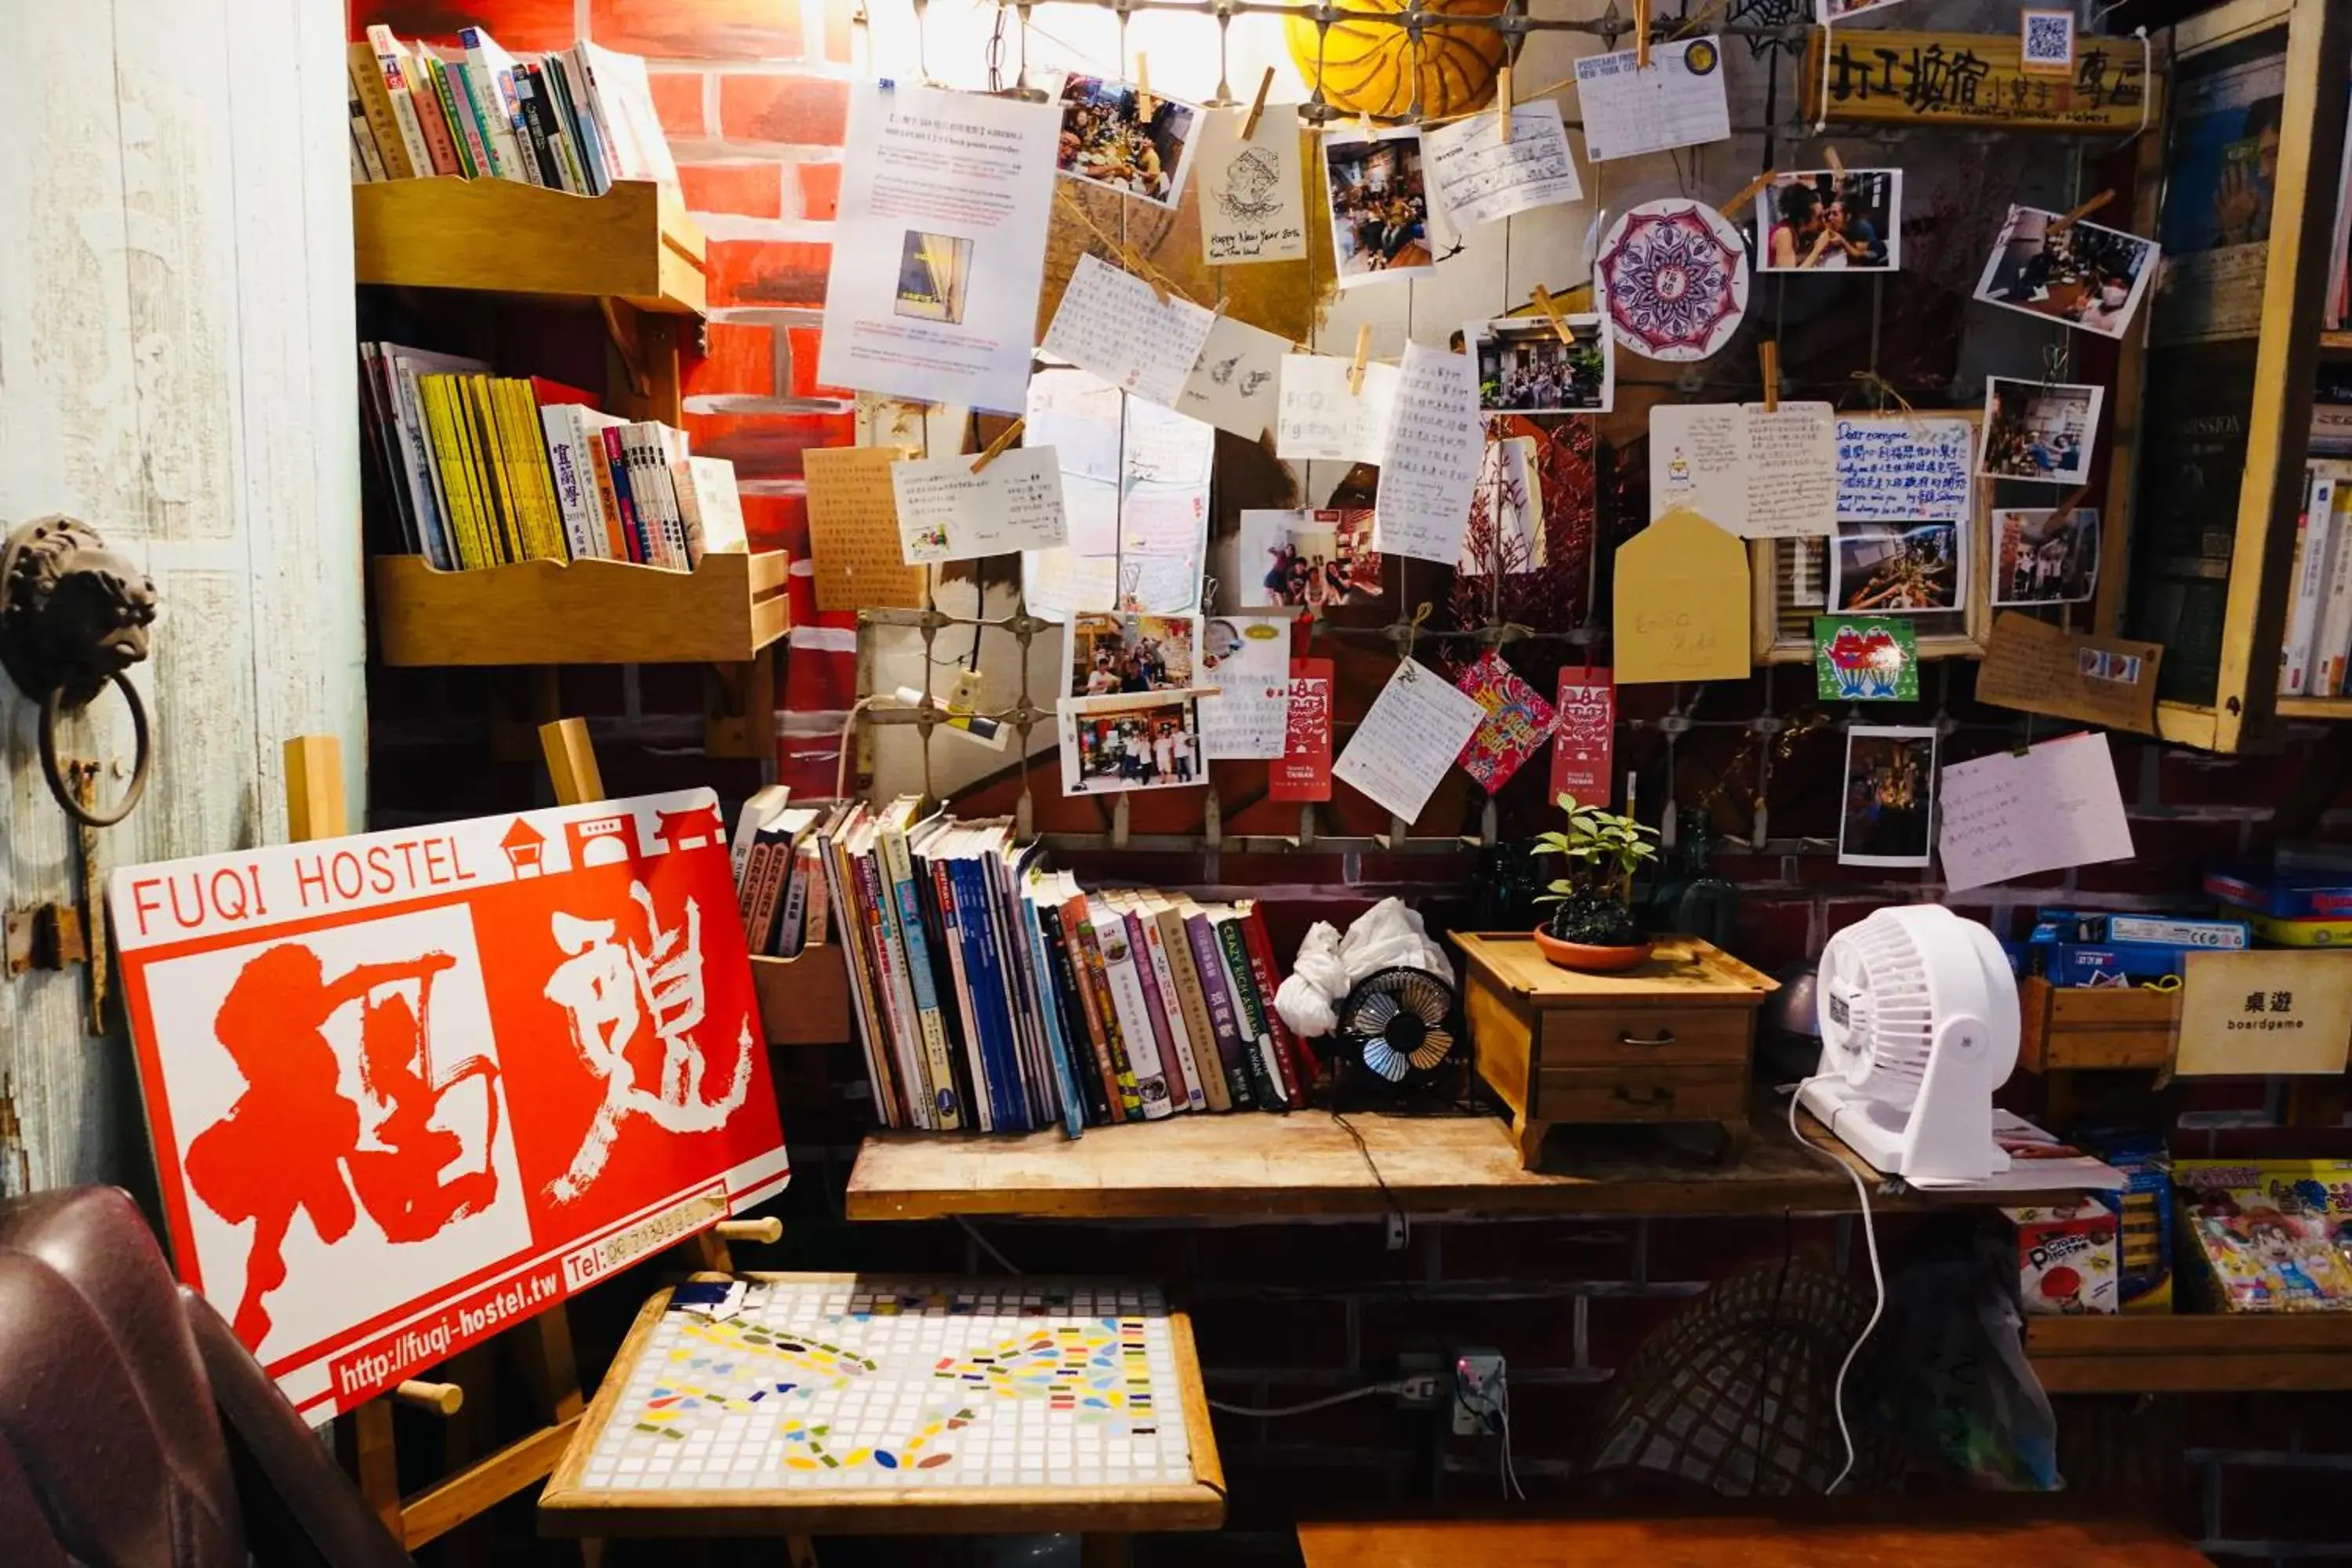 Library in Fuqi Hostel - Heping